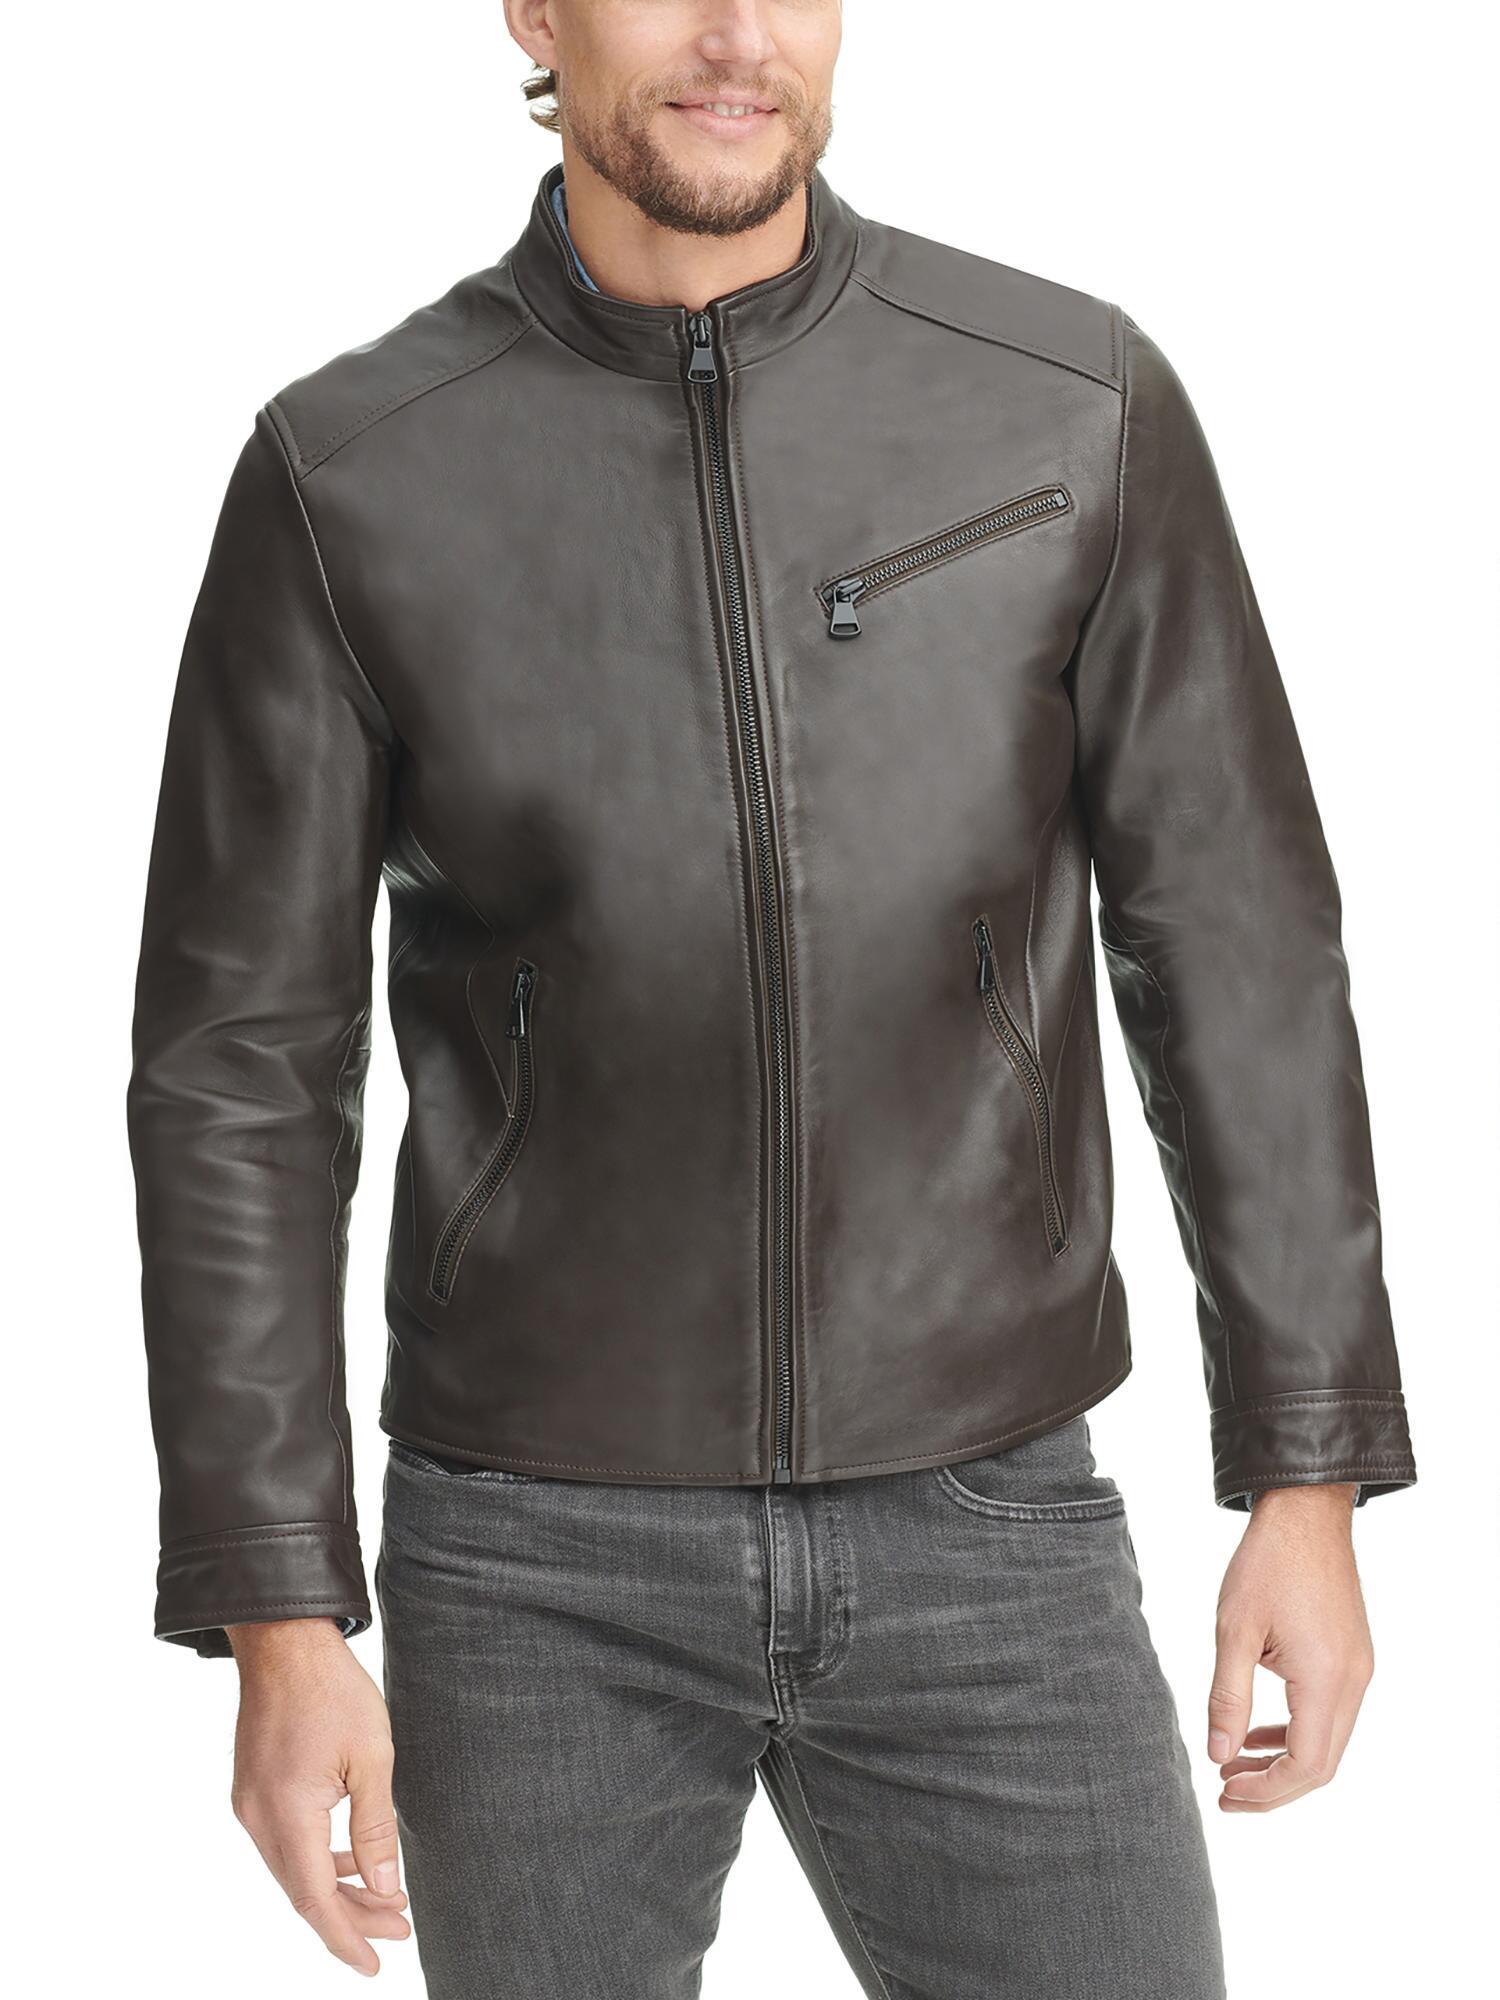 Wilsons Leather Leather Jacket With Zipper Pockets in Brown for Men - Lyst